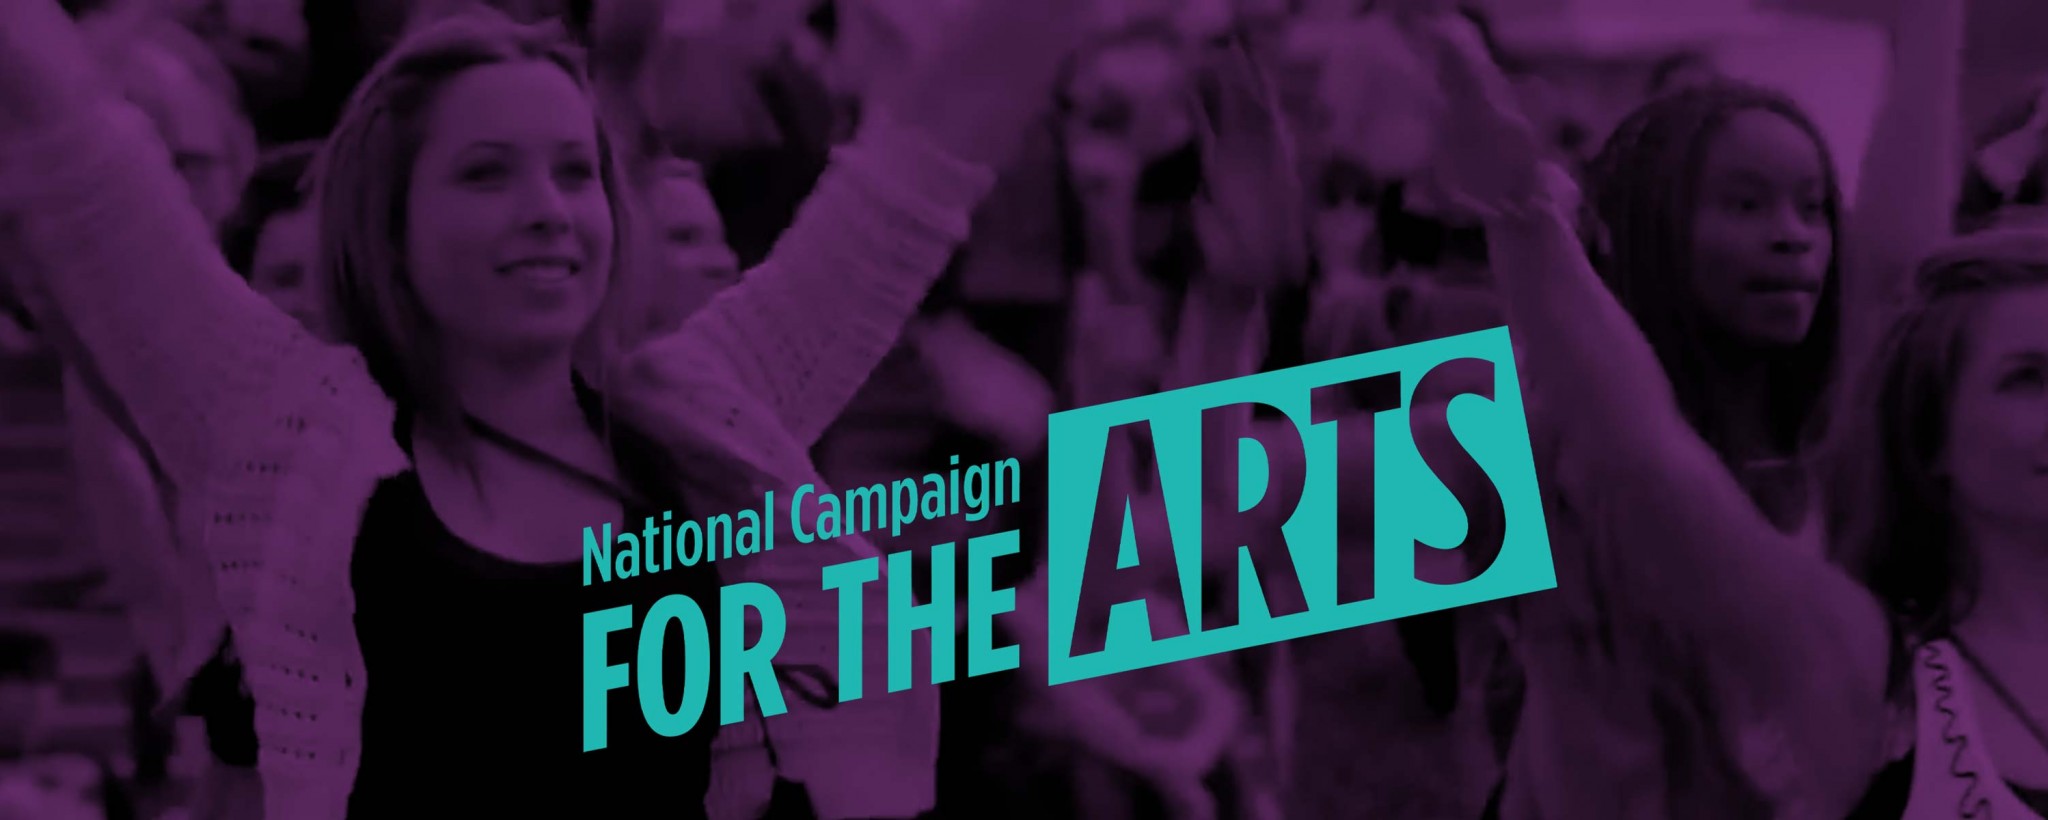 National Campaign for the Arts